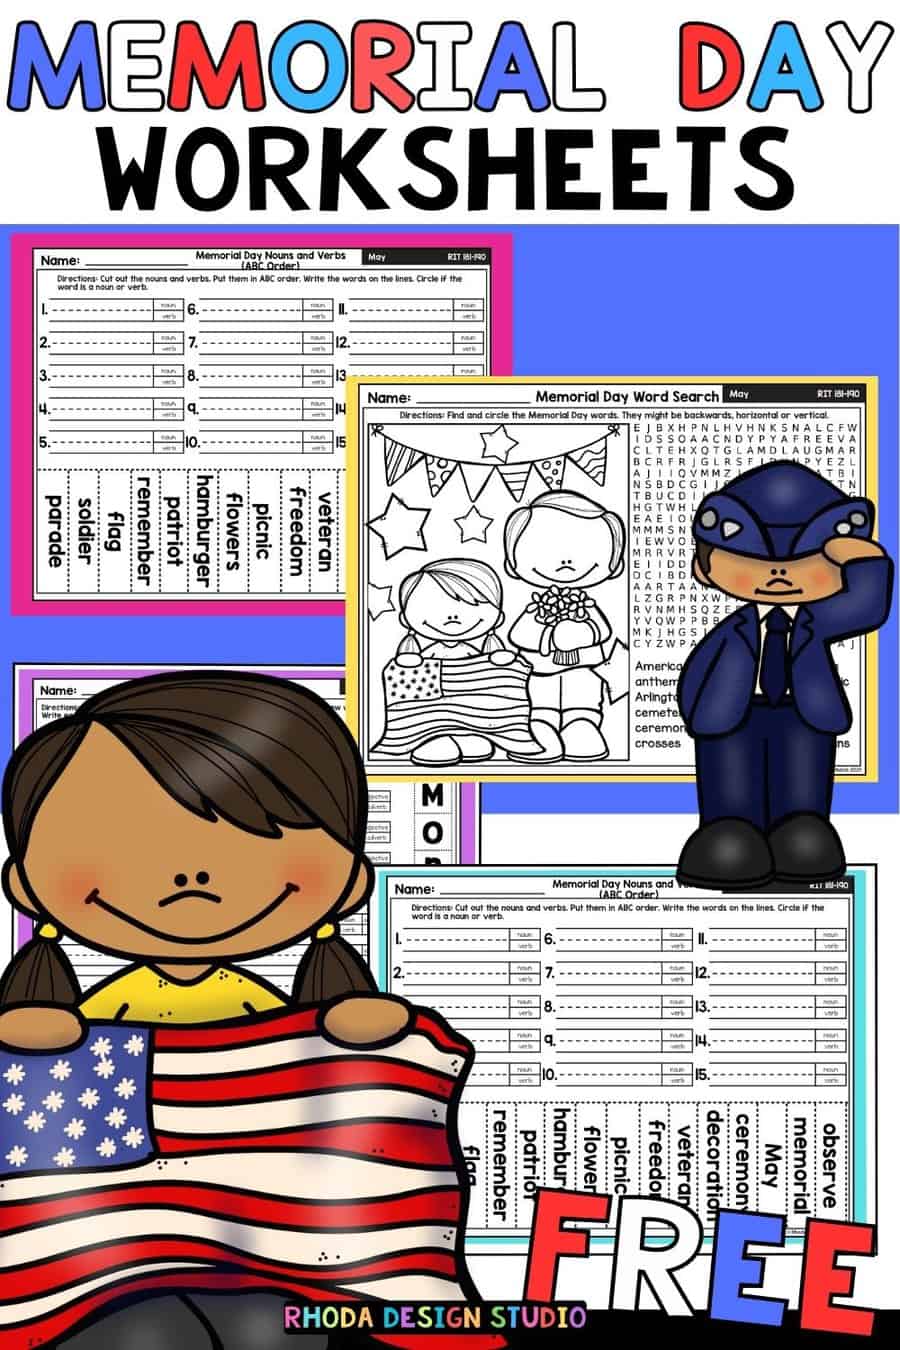 Memorial Day Worksheets: Honoring the Past Through Education and Engagement